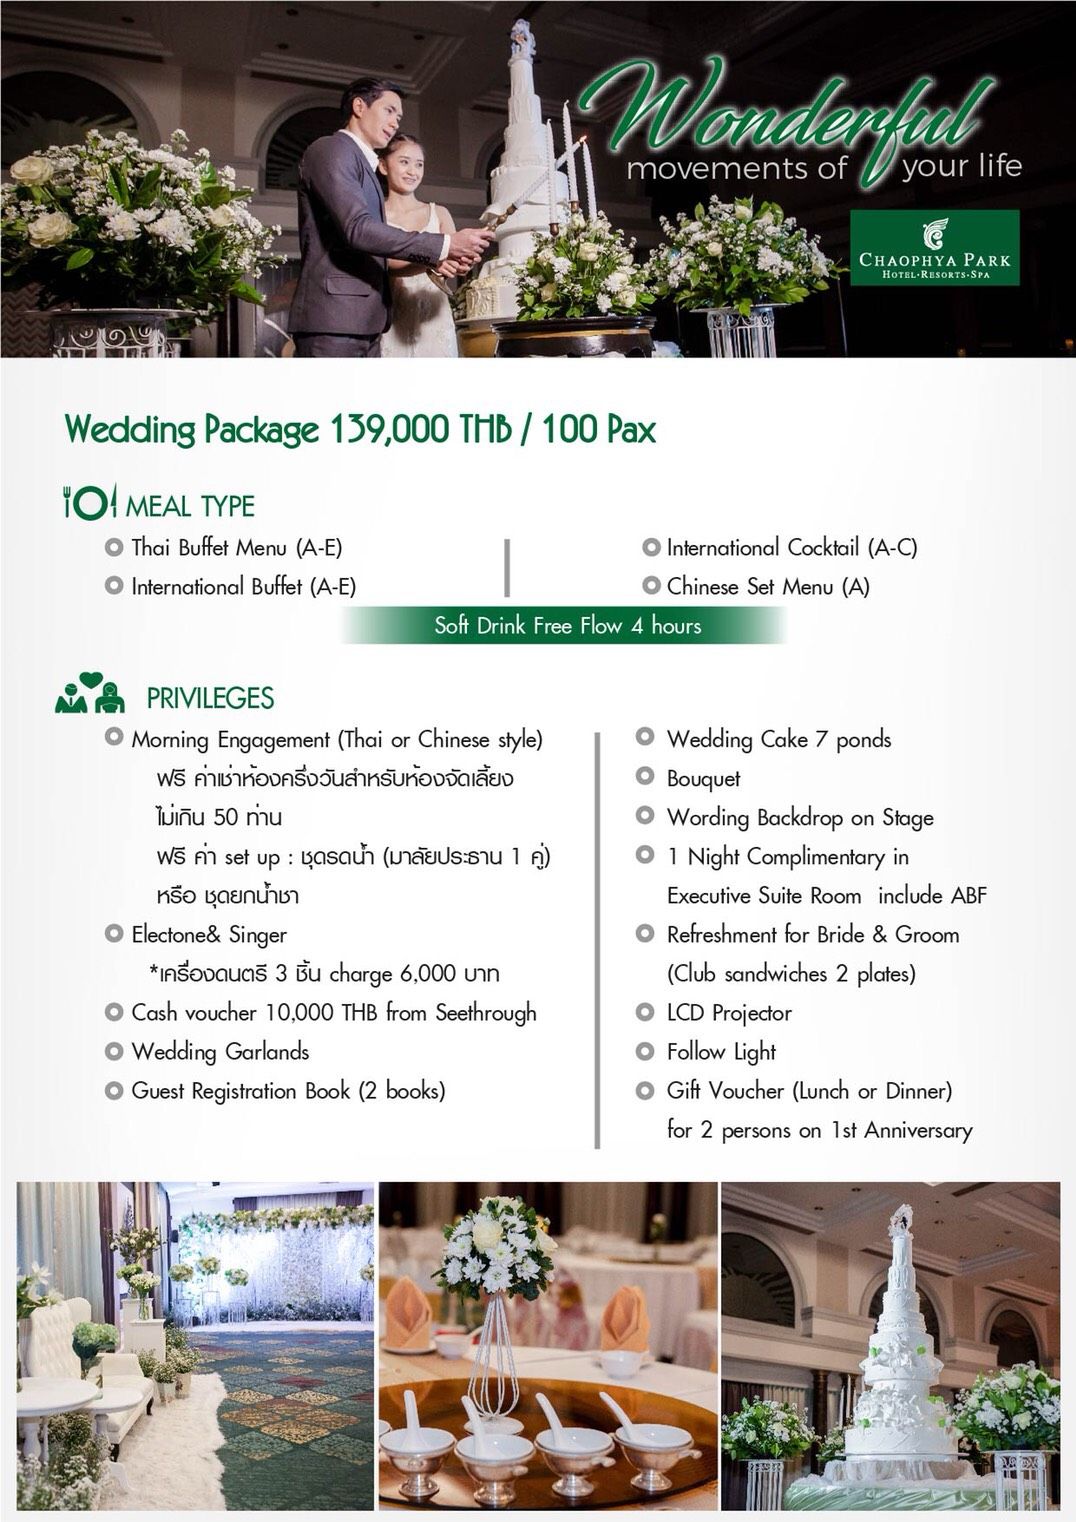 New Wedding Package 21.05.18 100